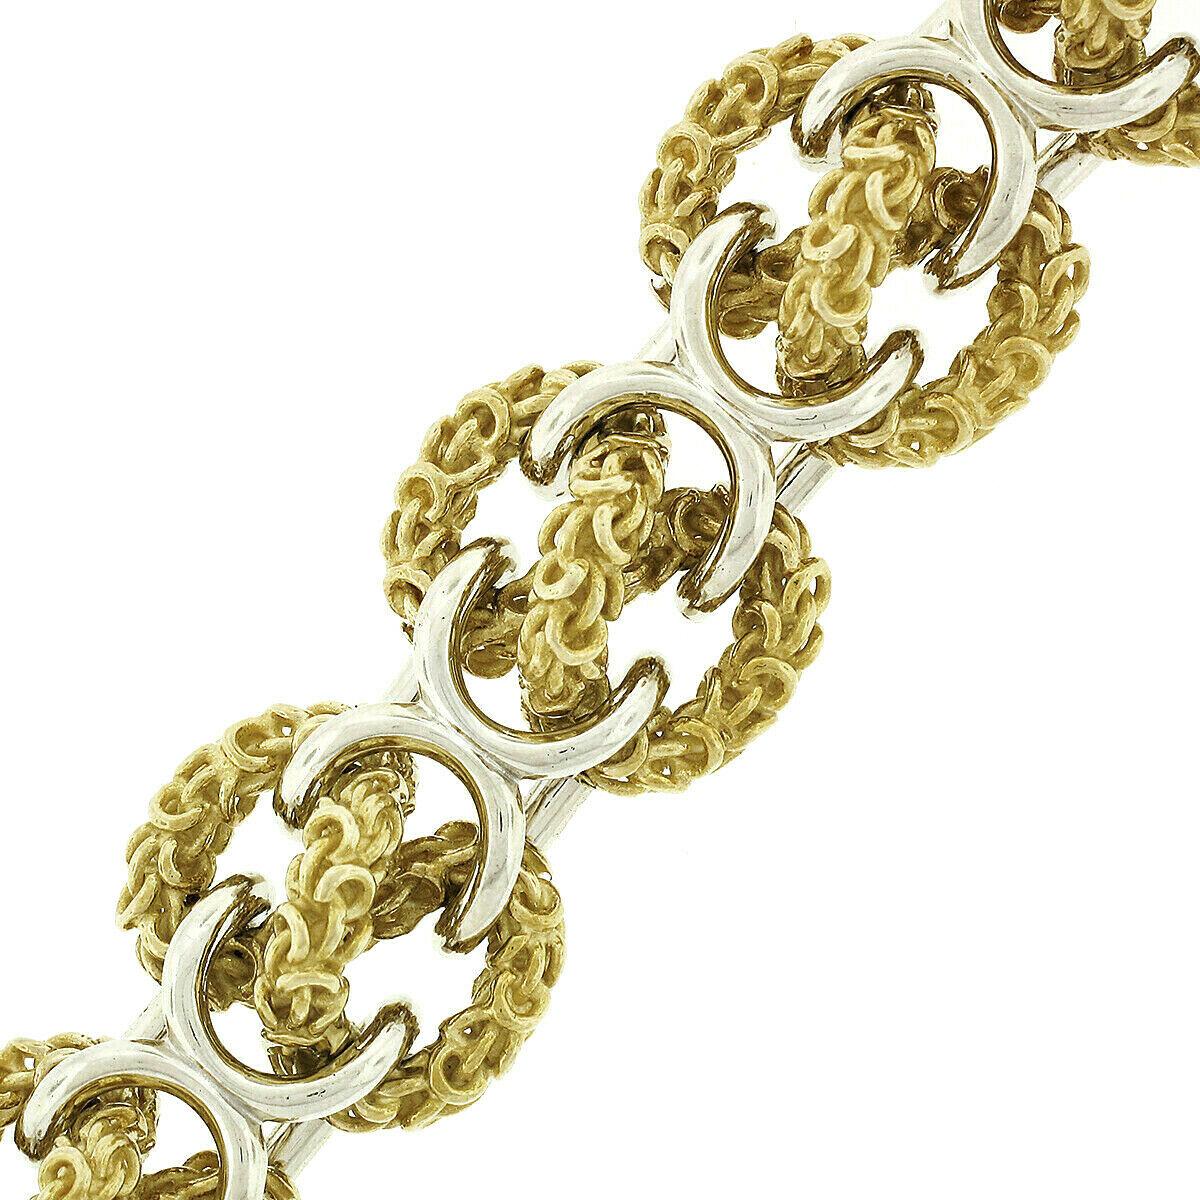 Heavy 18 Karat Yellow and White Gold Wide 3D Infinity Knot Chain Bracelet In Good Condition For Sale In Montclair, NJ